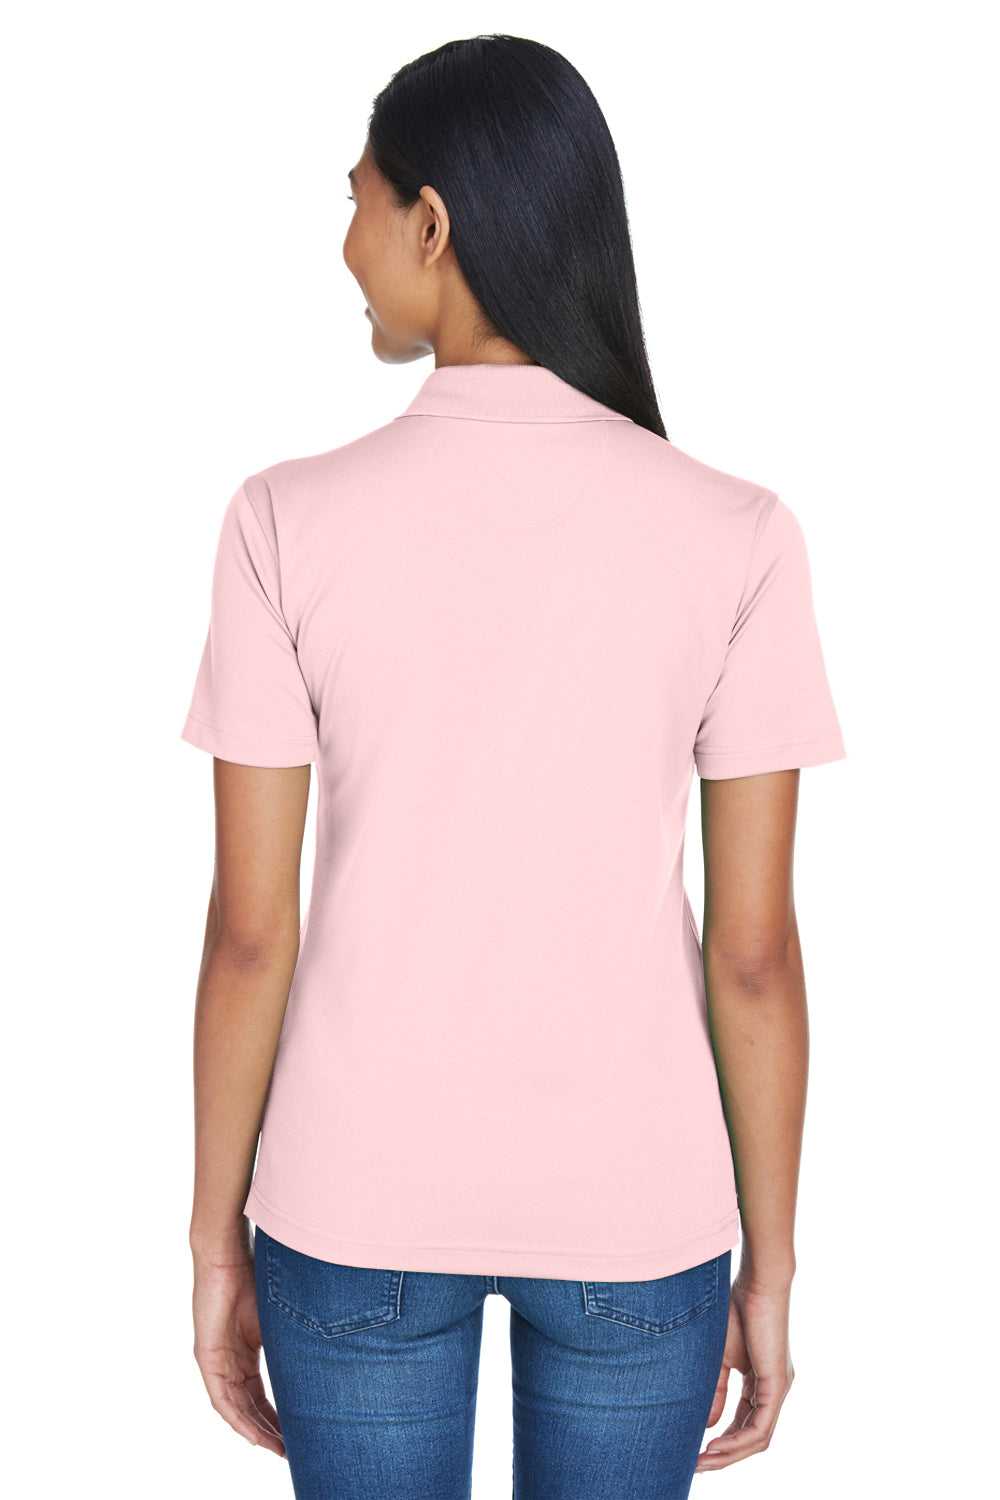 UltraClub 8404 Womens Cool & Dry Moisture Wicking Short Sleeve Polo Shirt Pink Back